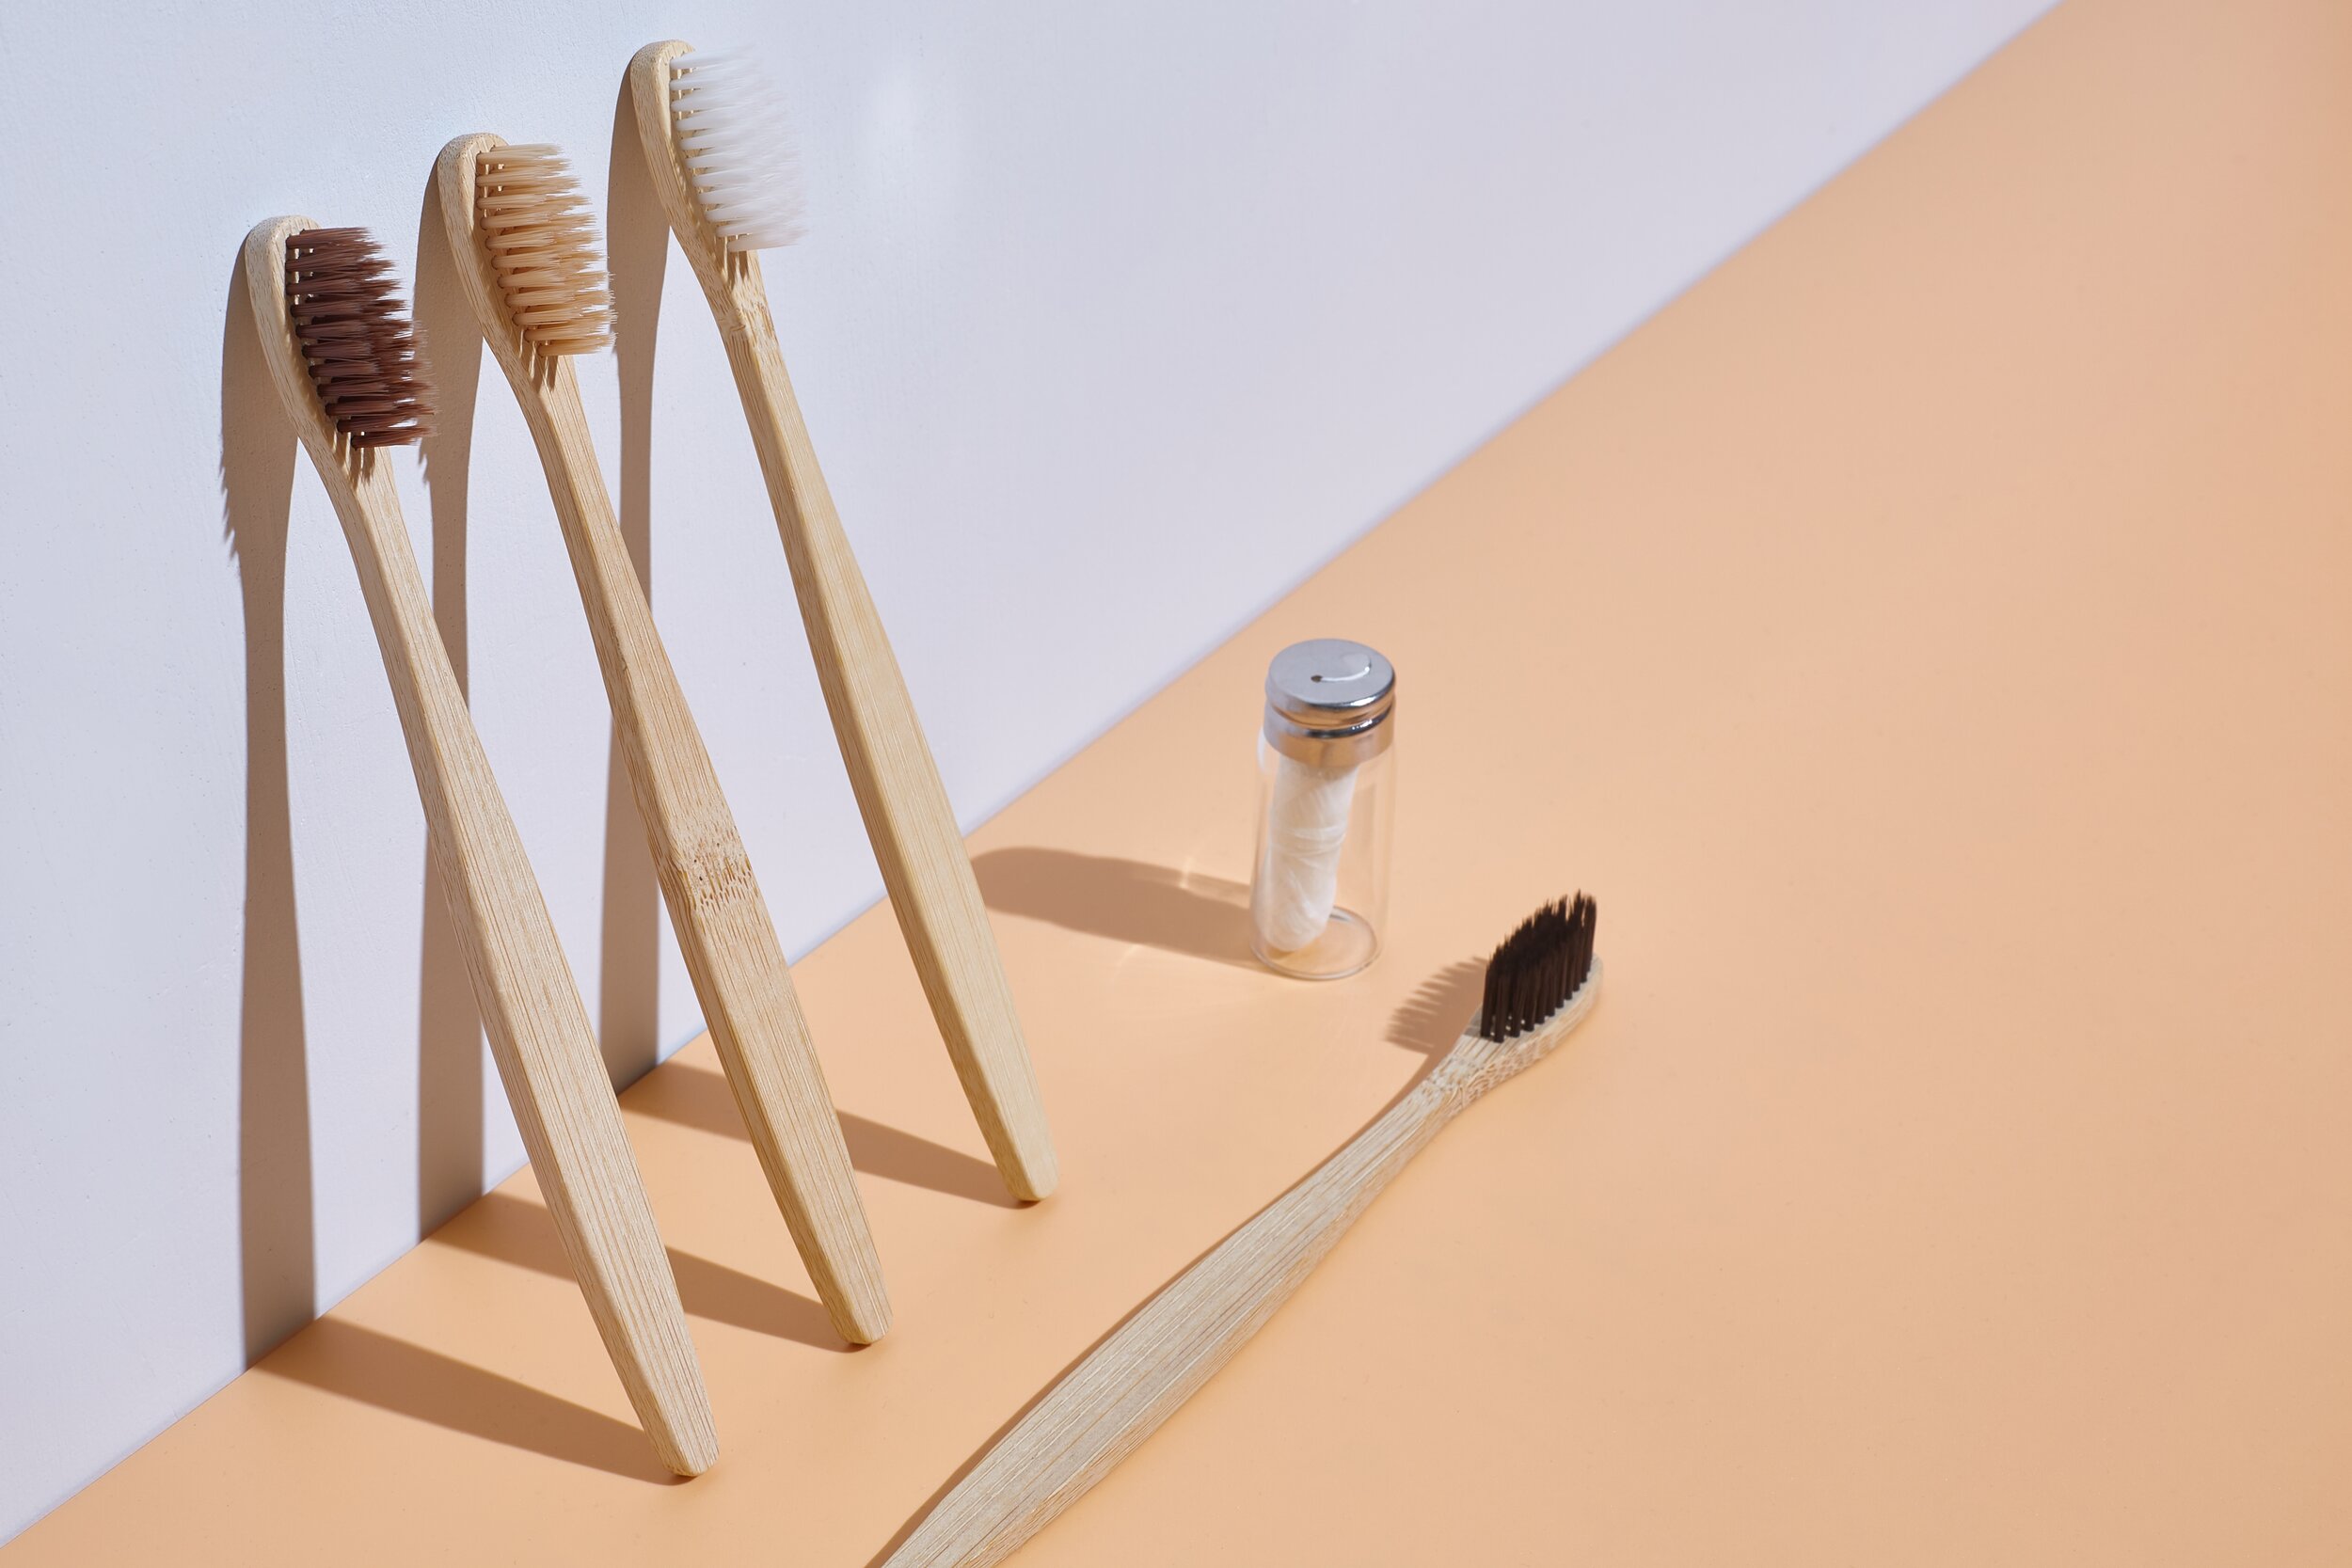 wooden-toothbrushes-with-dental-floss-the-concept-of-recycling-garbage-and-zero-waste-3d-light_t20_P0xoXR.jpg